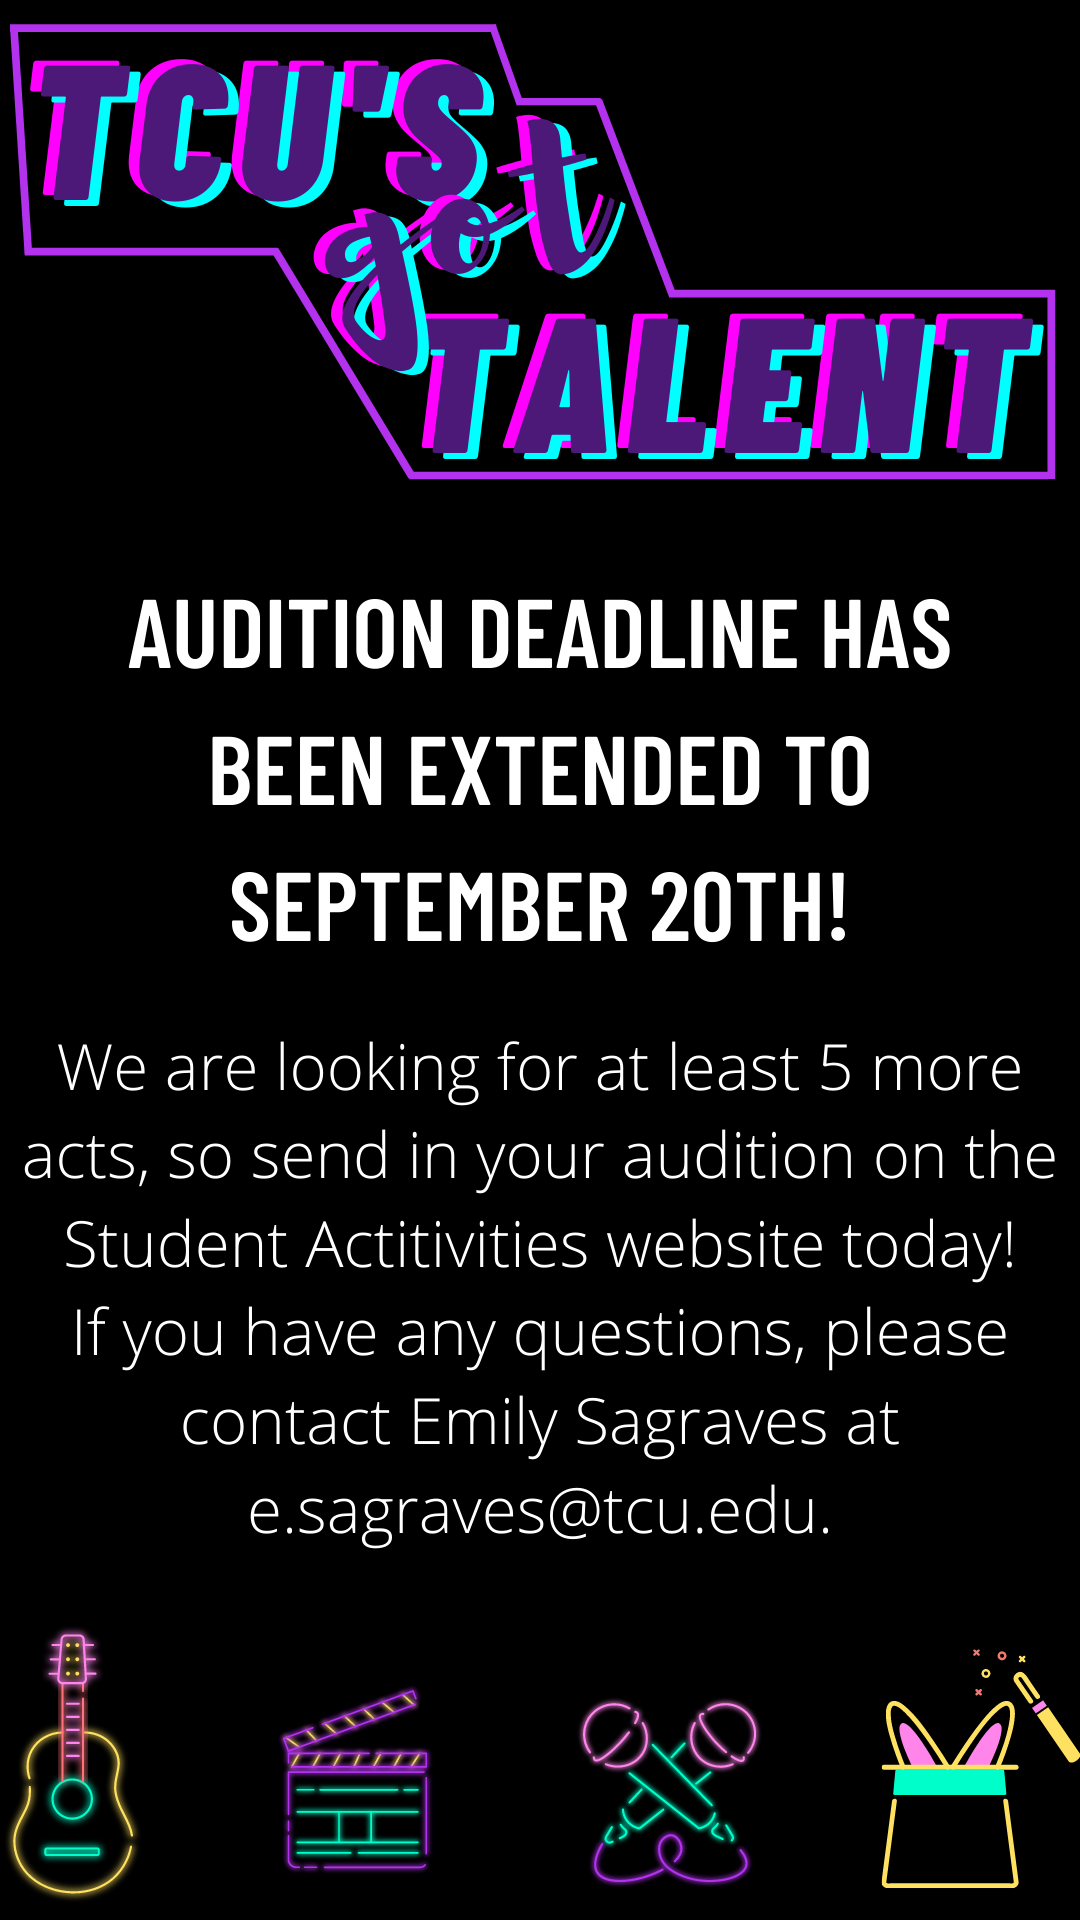 Audition deadline has been extended!